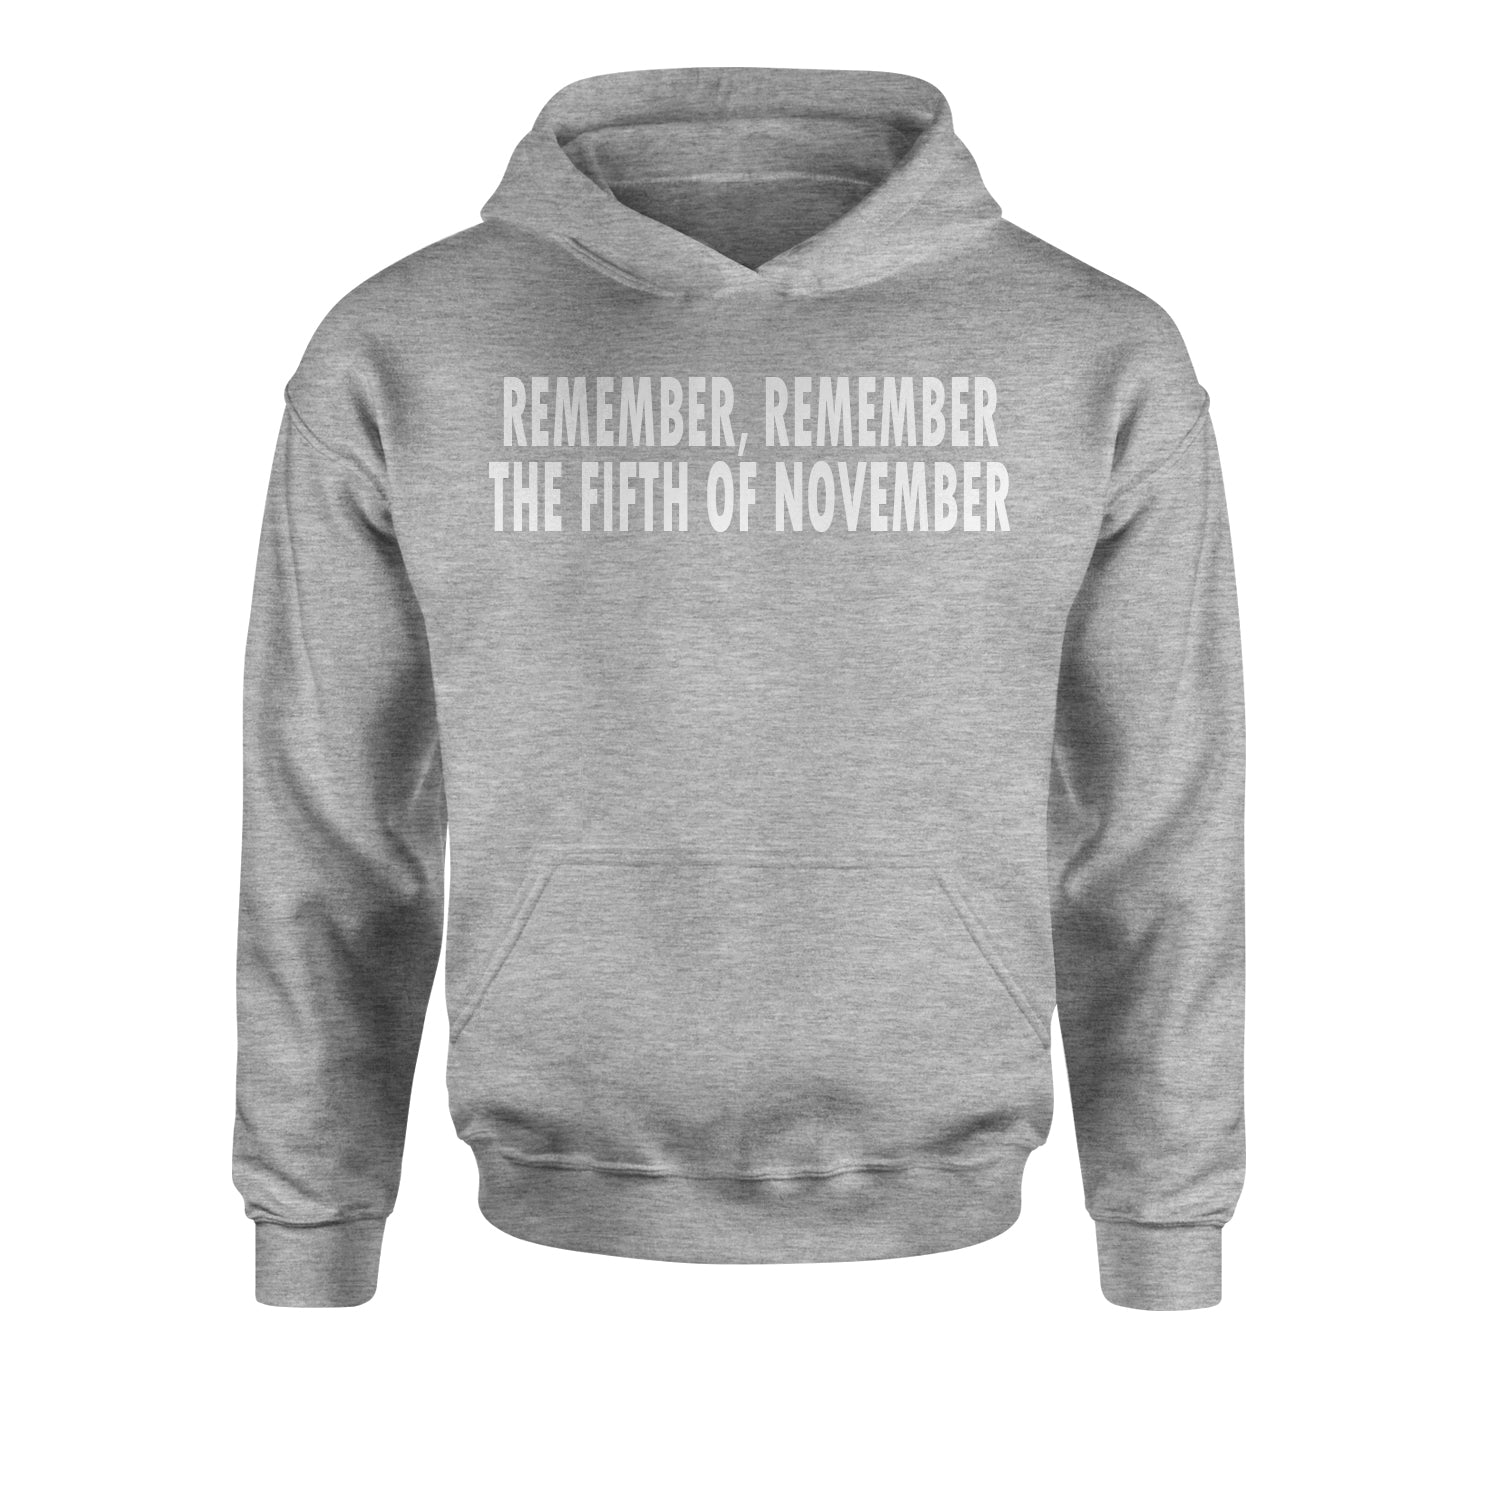 Remember The Fifth Of November Youth-Sized Hoodie for, v, vendetta, vforvendetta, youth-sized by Expression Tees